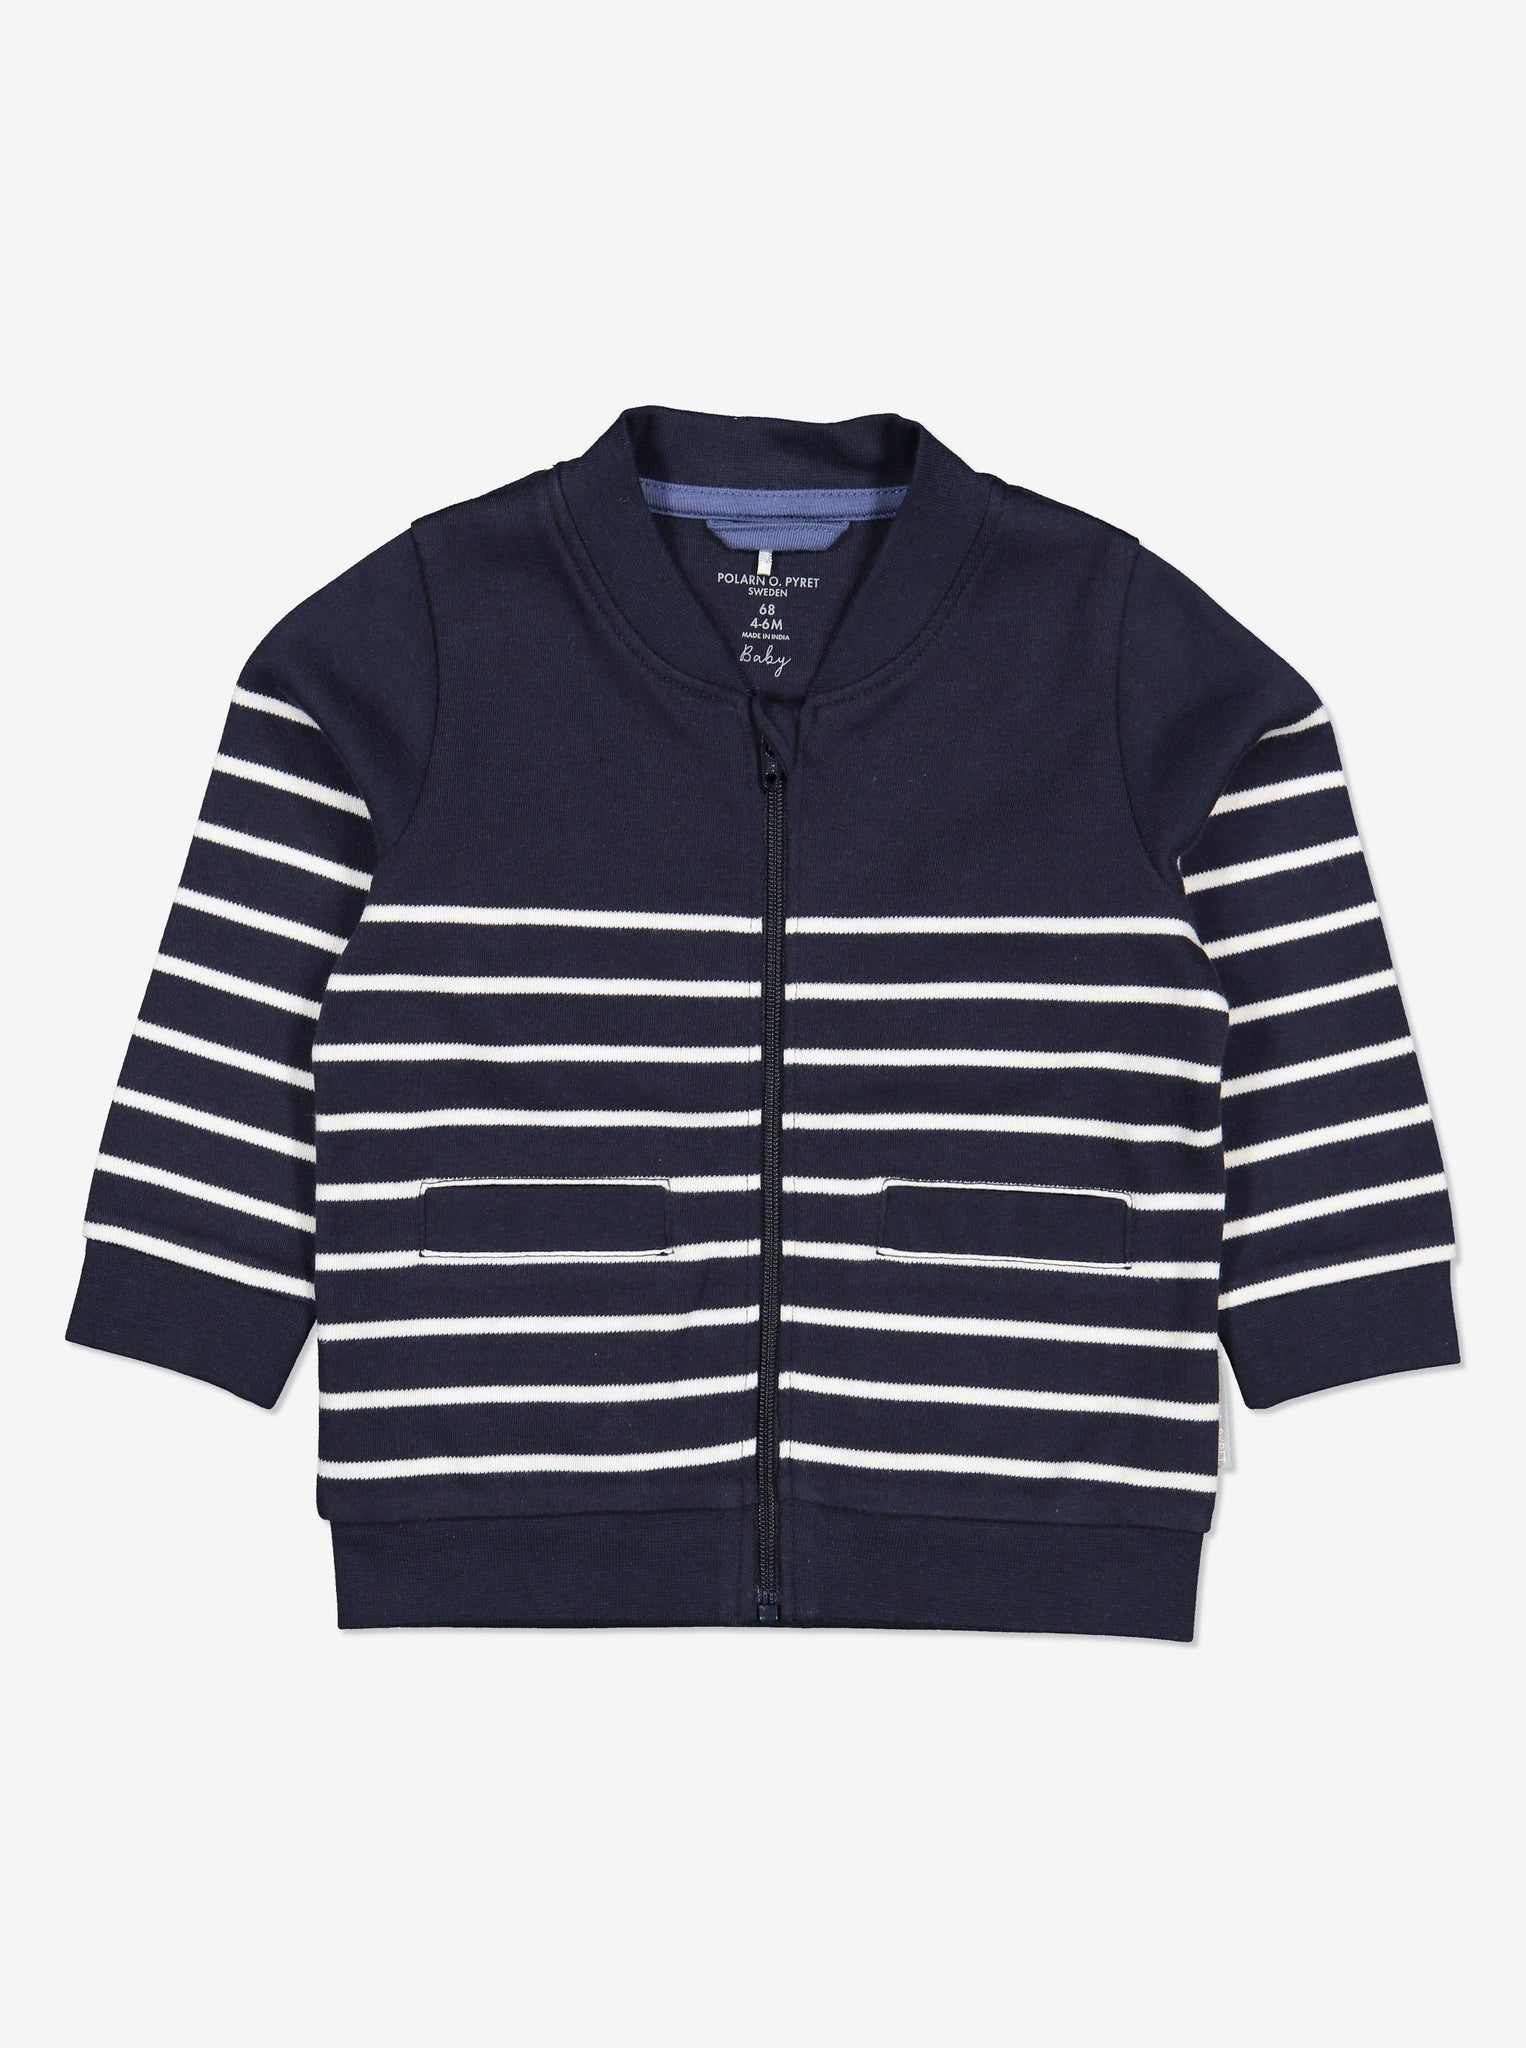 Navy and white striped sweatshirt for babies with front zip and two pockets. Made from 100% organic cotton.